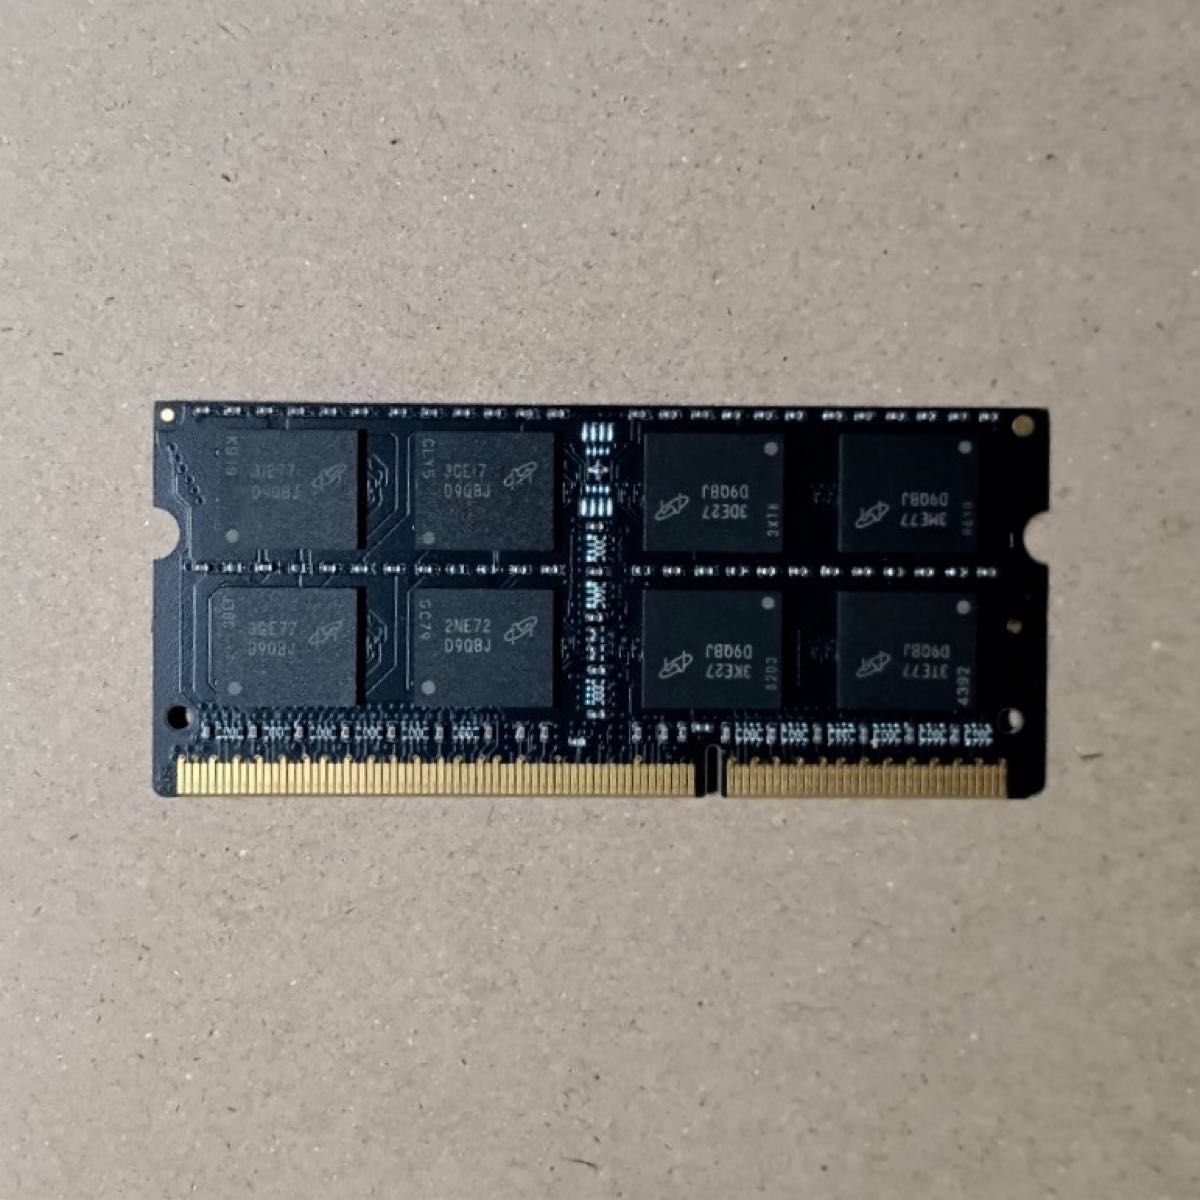 Micron(マイクロン) 8GB 2Rx8 PC3L-14900SDDR3  1866 MHz 1枚 (中古品)